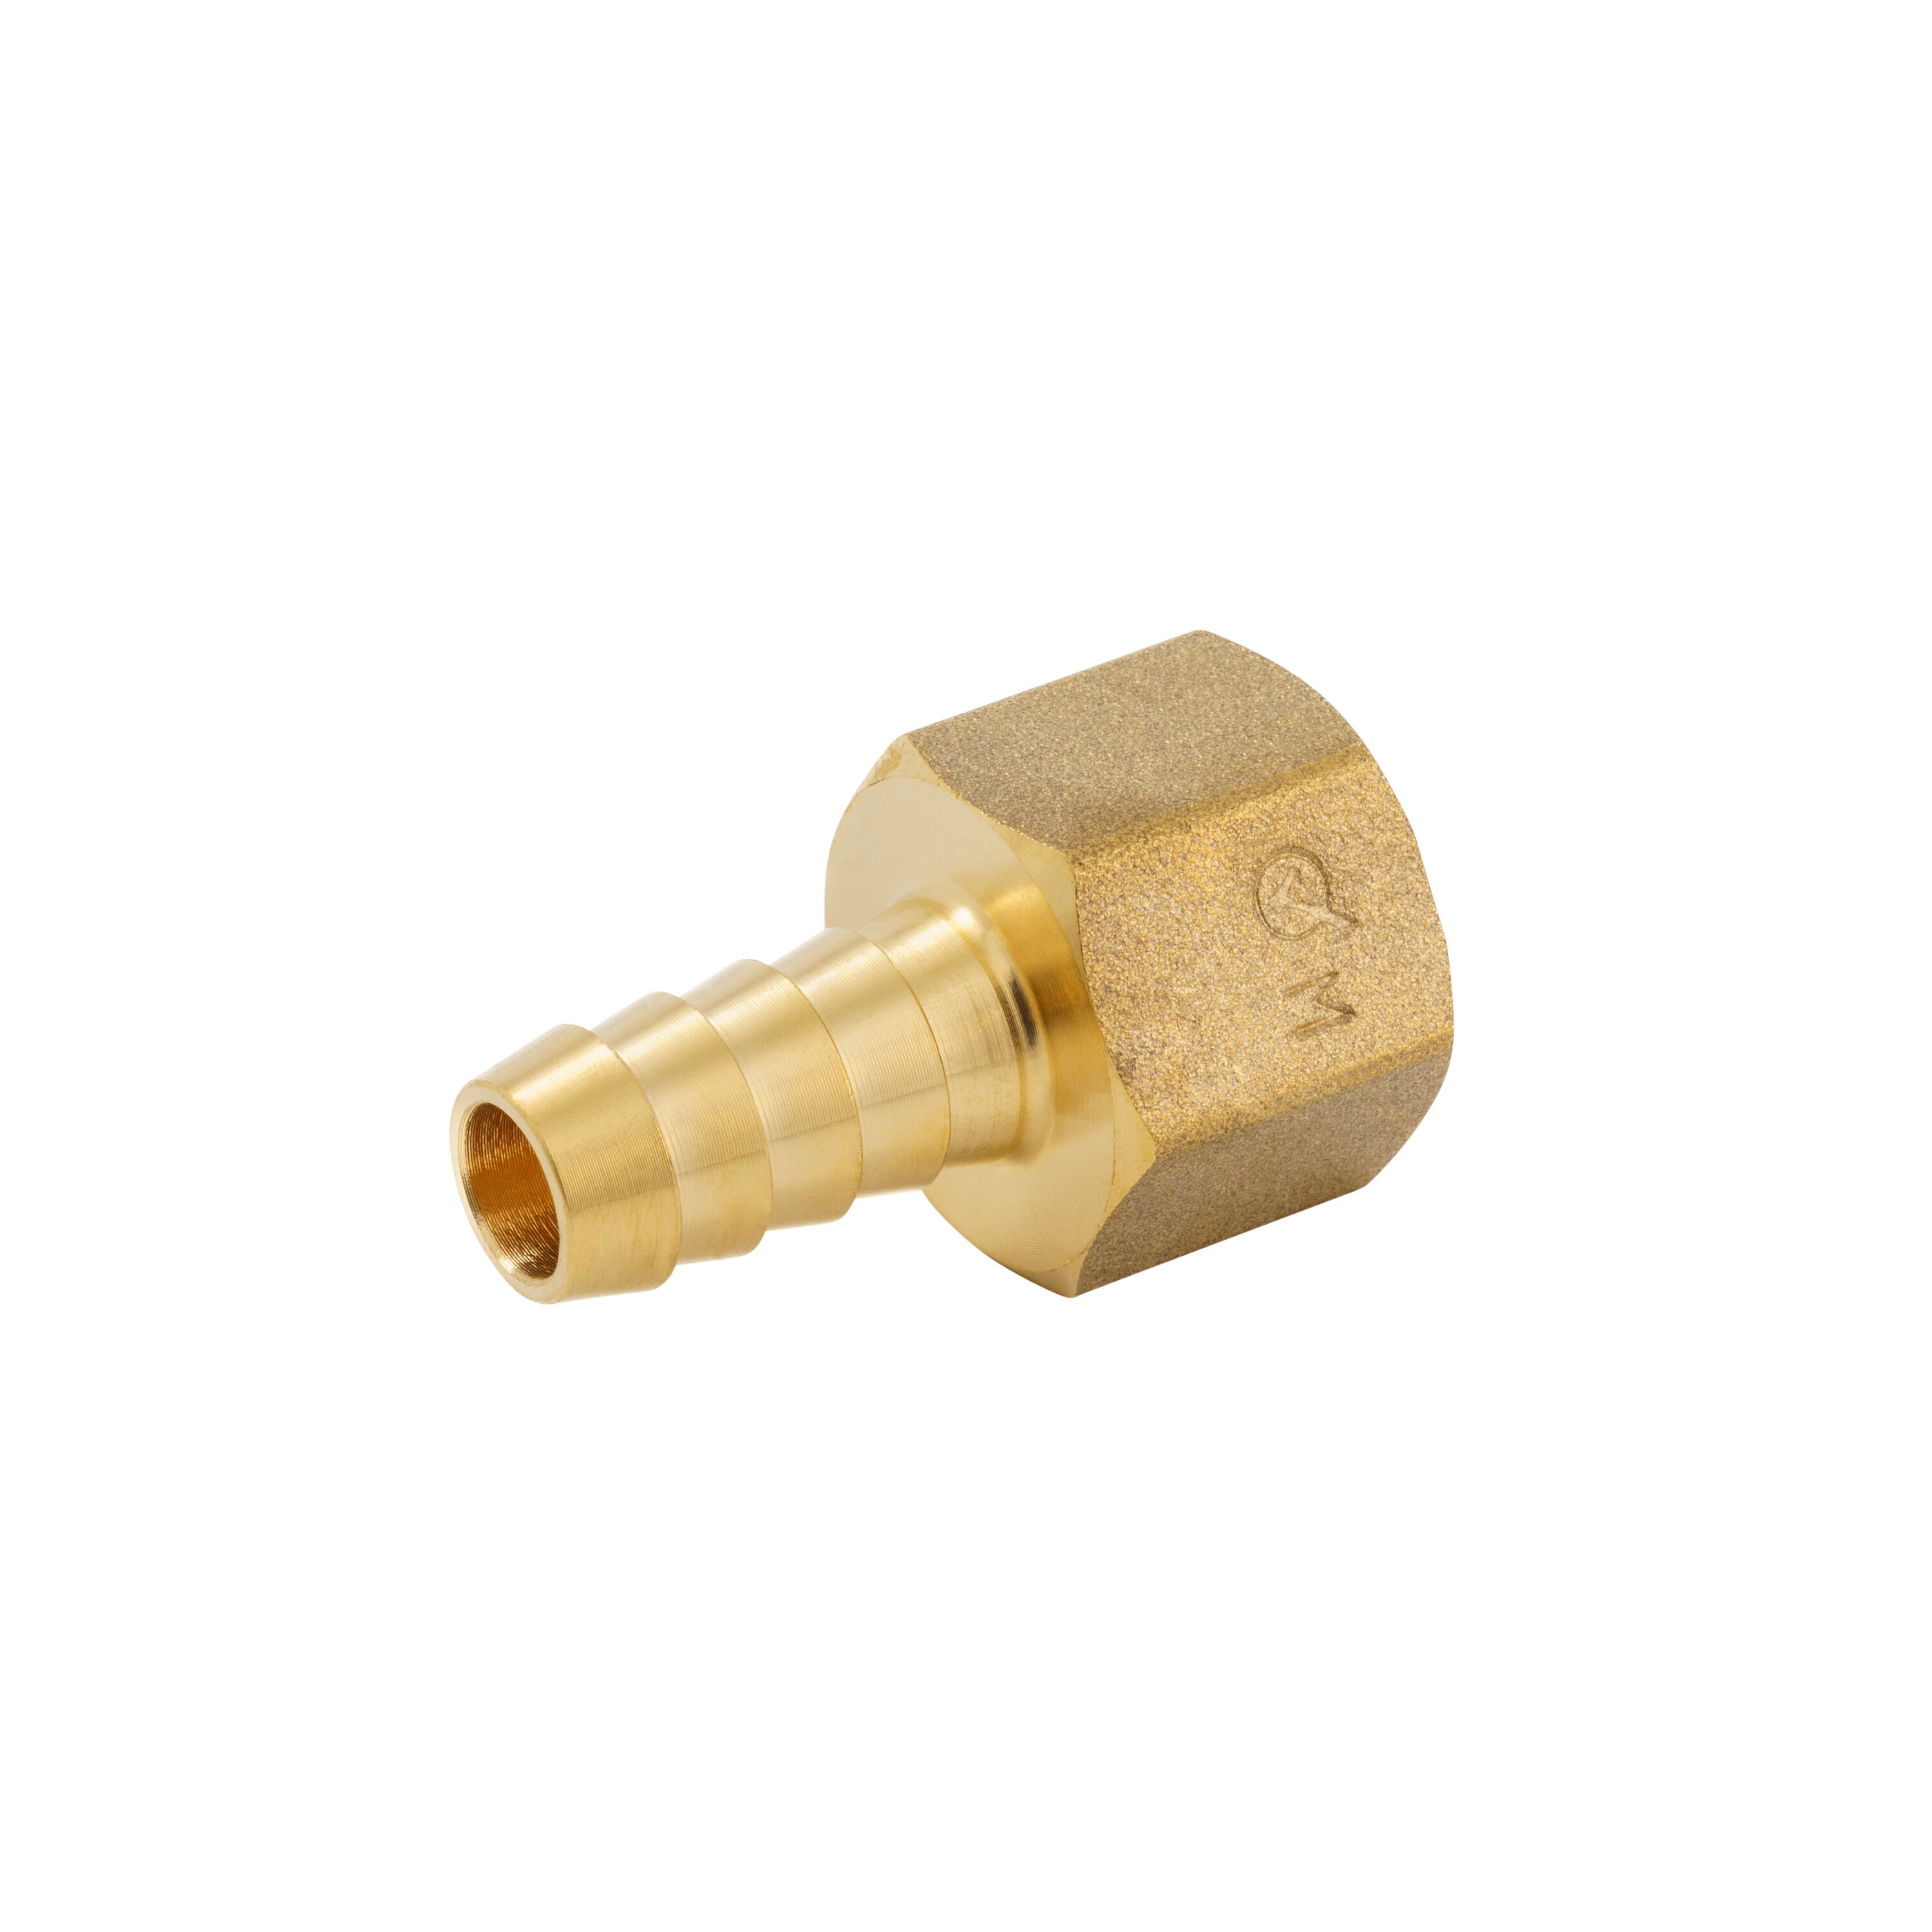 Proline Series 3/8-in x 1/2-in Threaded Coupling Fitting in the